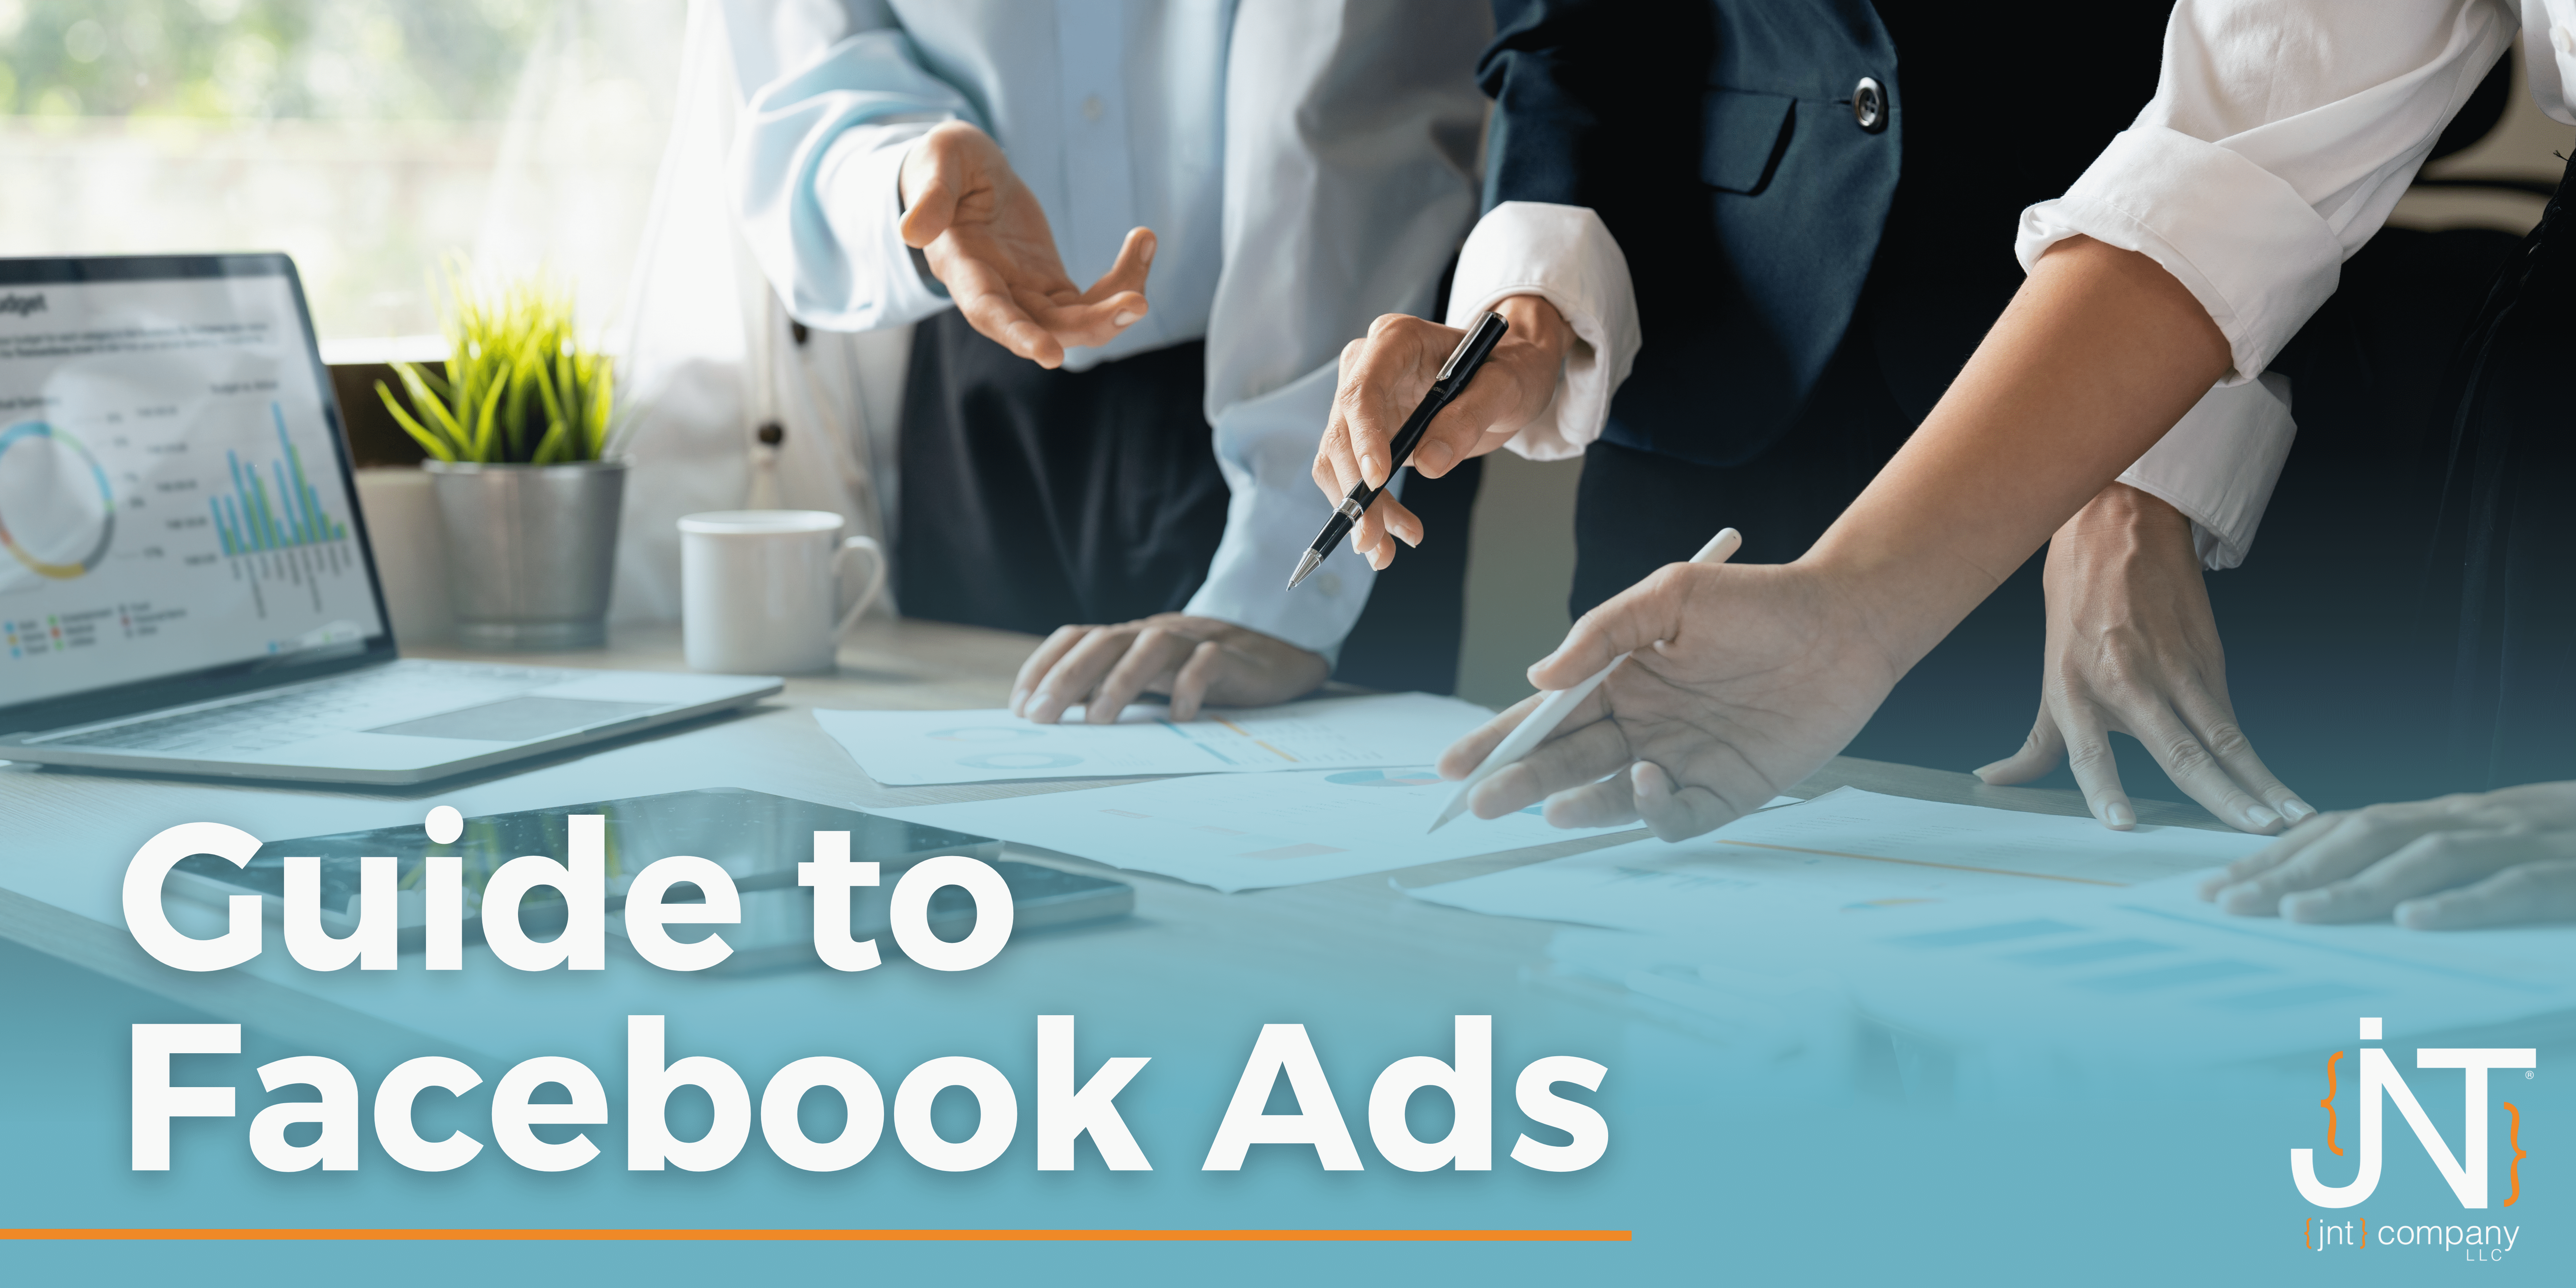 Guide to Facebook Ads Graphic